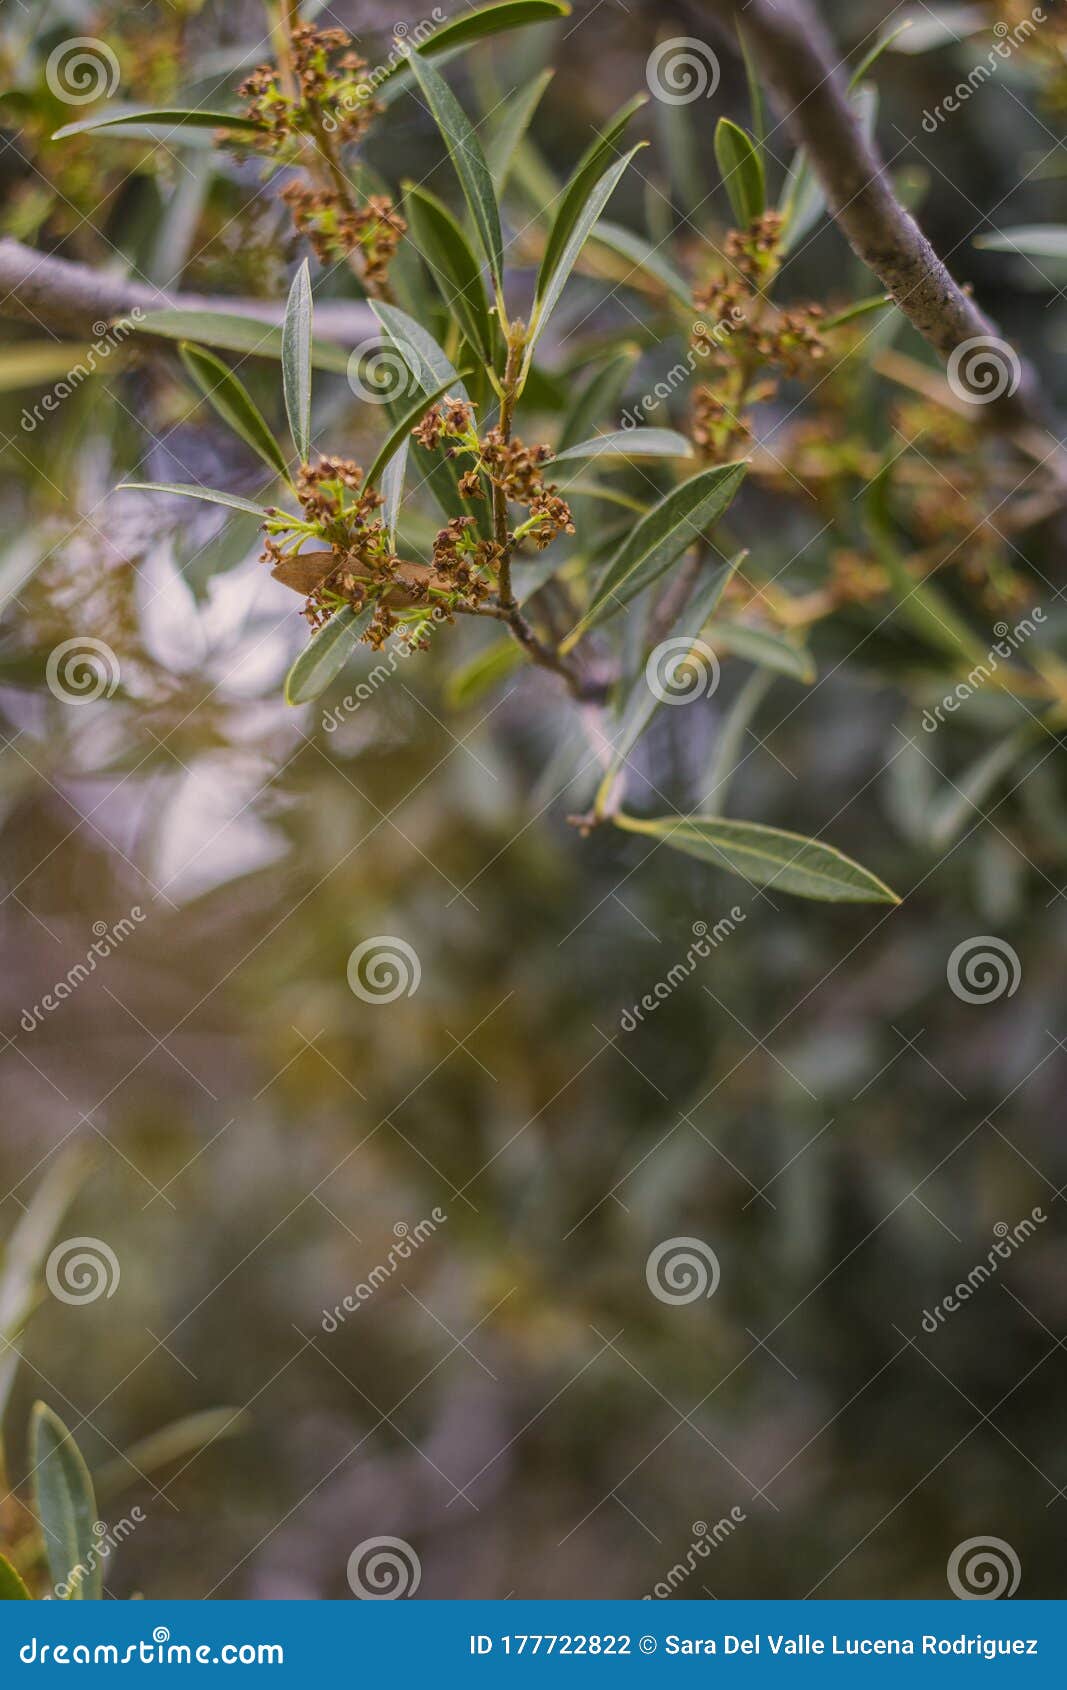 natural background of shoots of a tree blooming in the middle of spring with views towards the blue sky